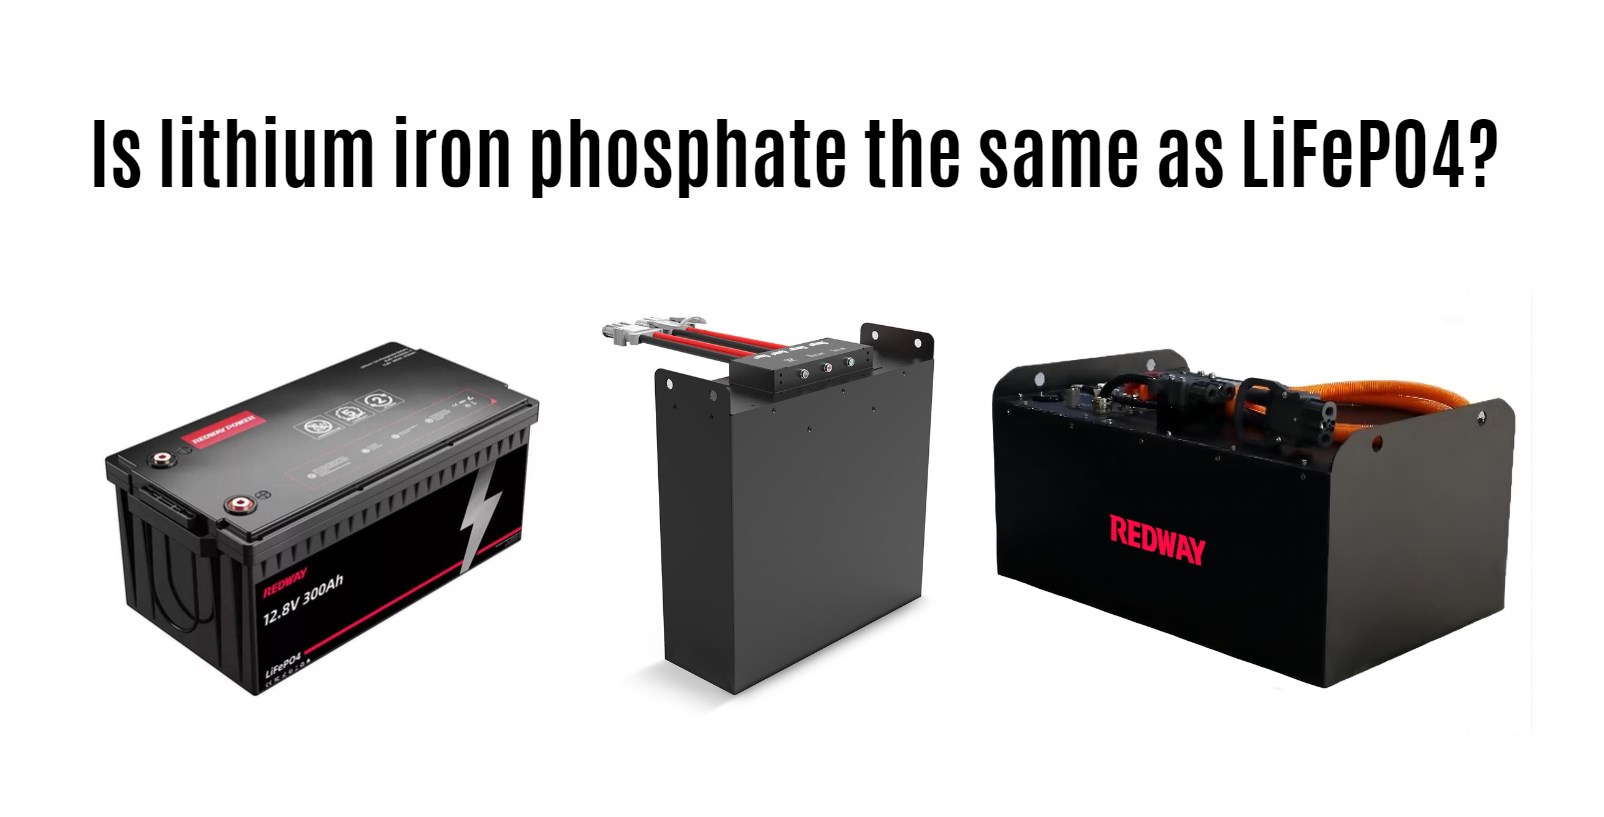 Is lithium iron phosphate the same as LiFePO4? 12v 300ah lithium battery. forklift lithium battery factory